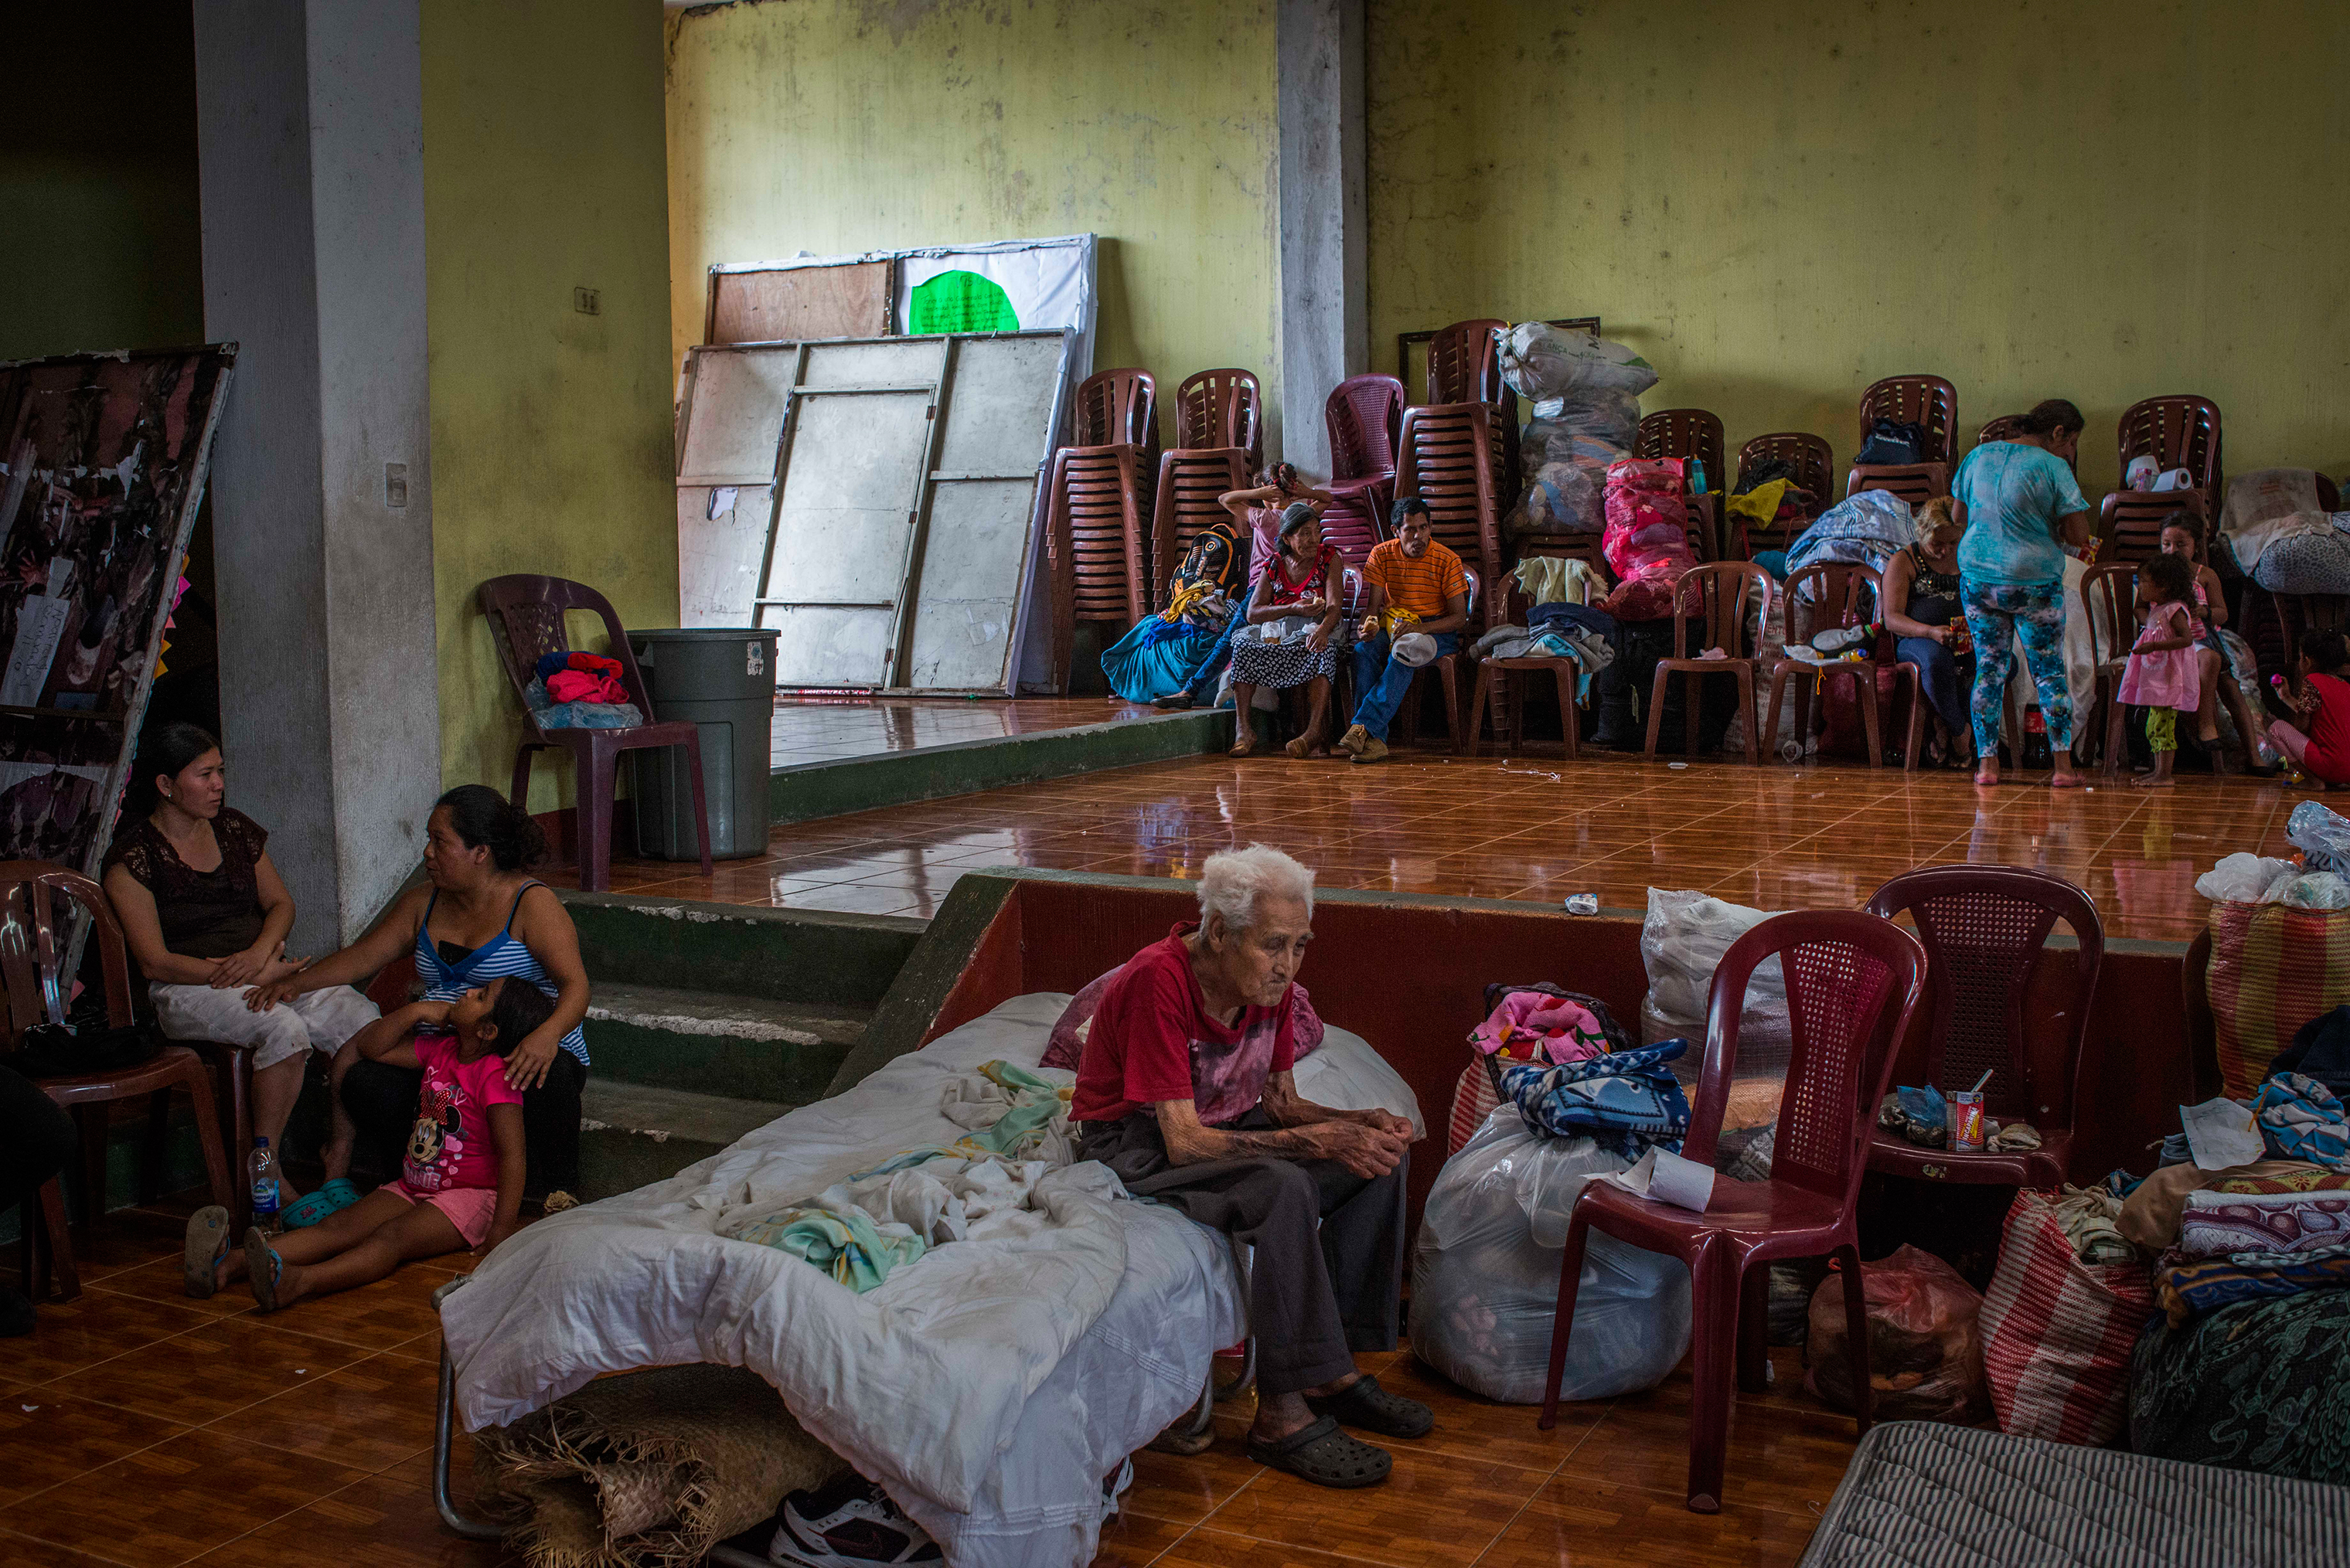 Residents of San Miguel Los Lotes rest in a shelter in Escuintla, a nearby city, on June 4. (Daniele Volpe)